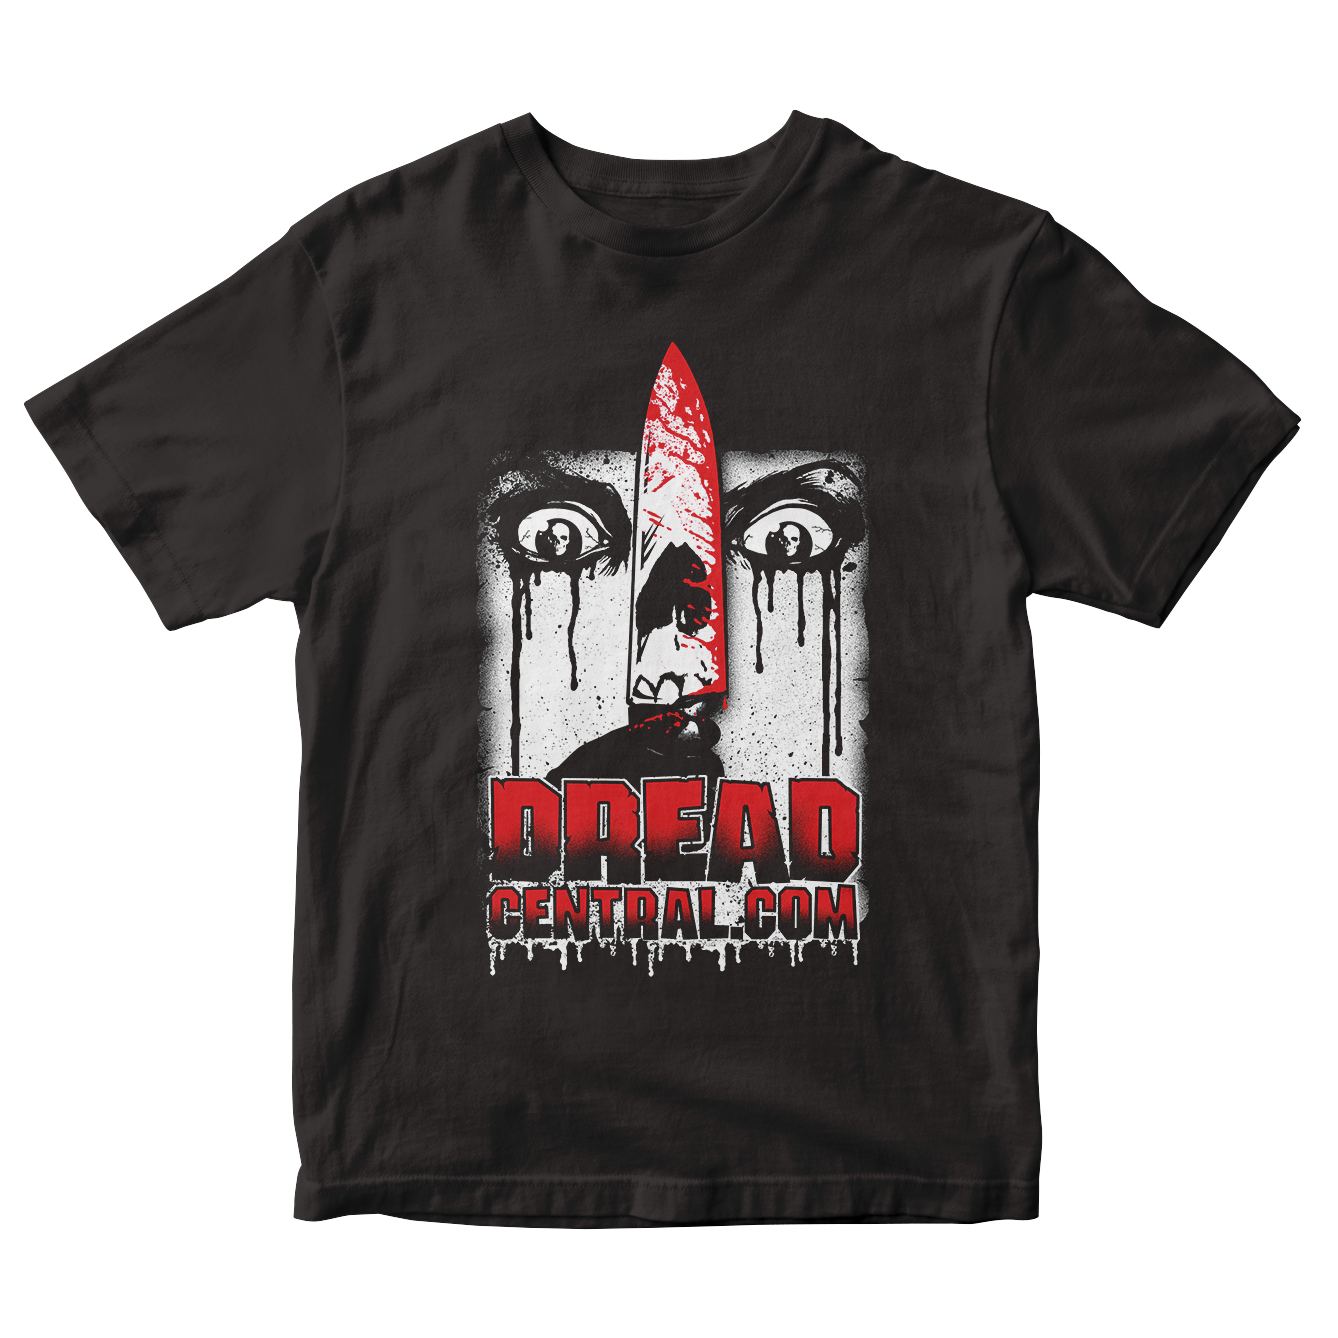 DREAD CENTRAL LOGO BY GHOULISH GARY T-SHIRT